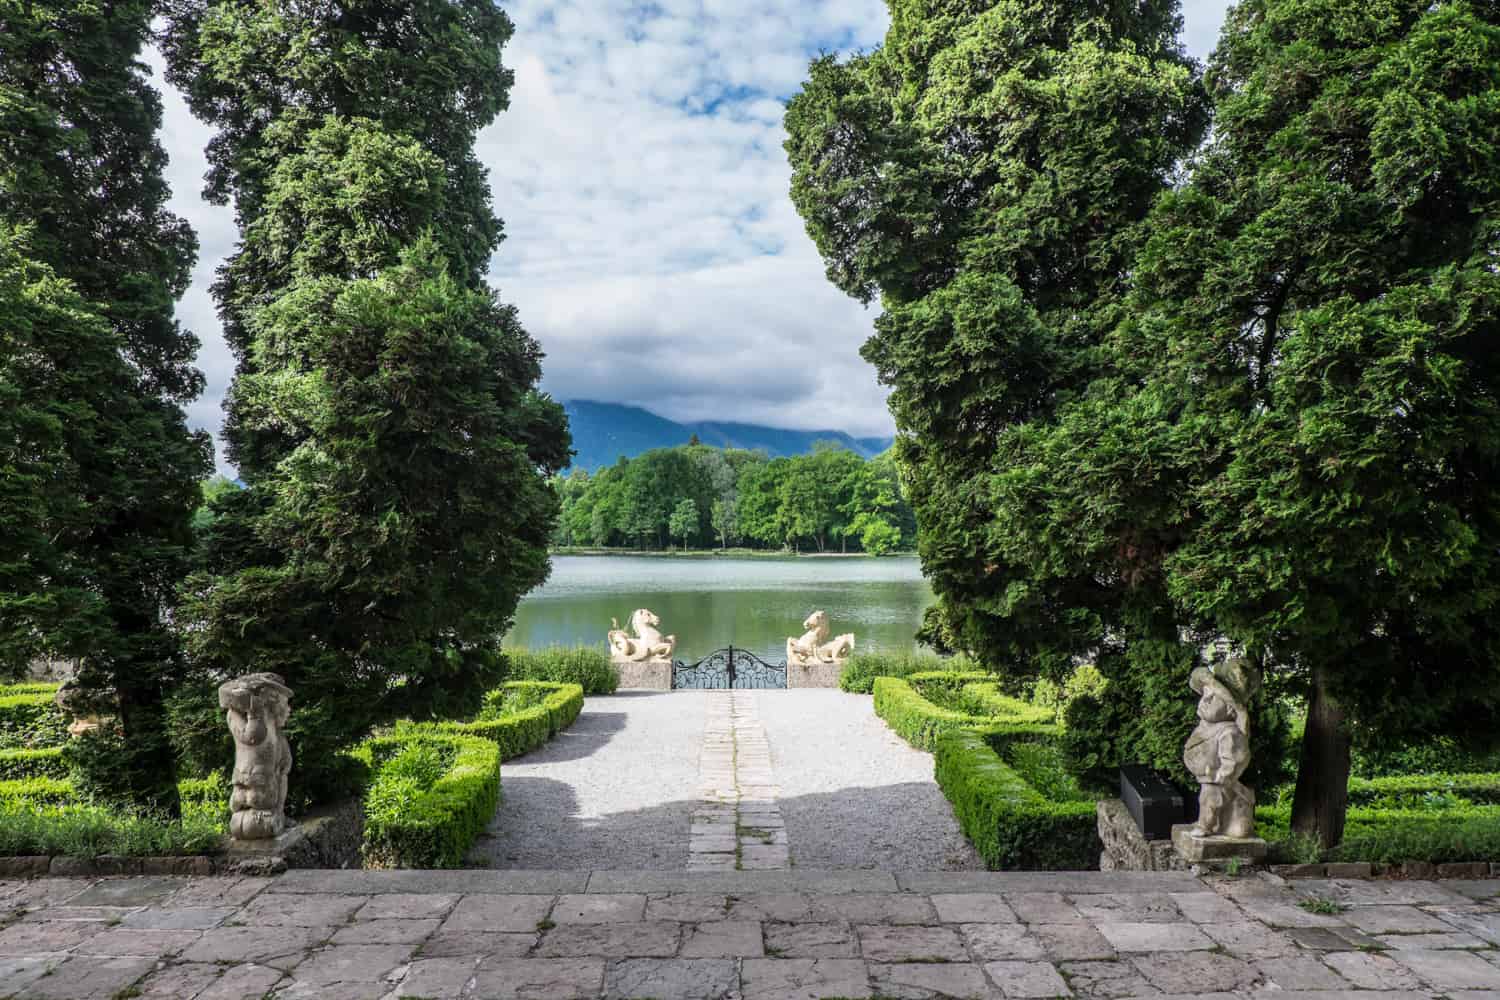 Two white stone horses' heads either side of a black metal gate overlooking a lake surrounded by trees. The 'Horse Head Gate' was made famous in The Sound of Music and is found at Schloss Leopoldskron in Salzburg, Austria.